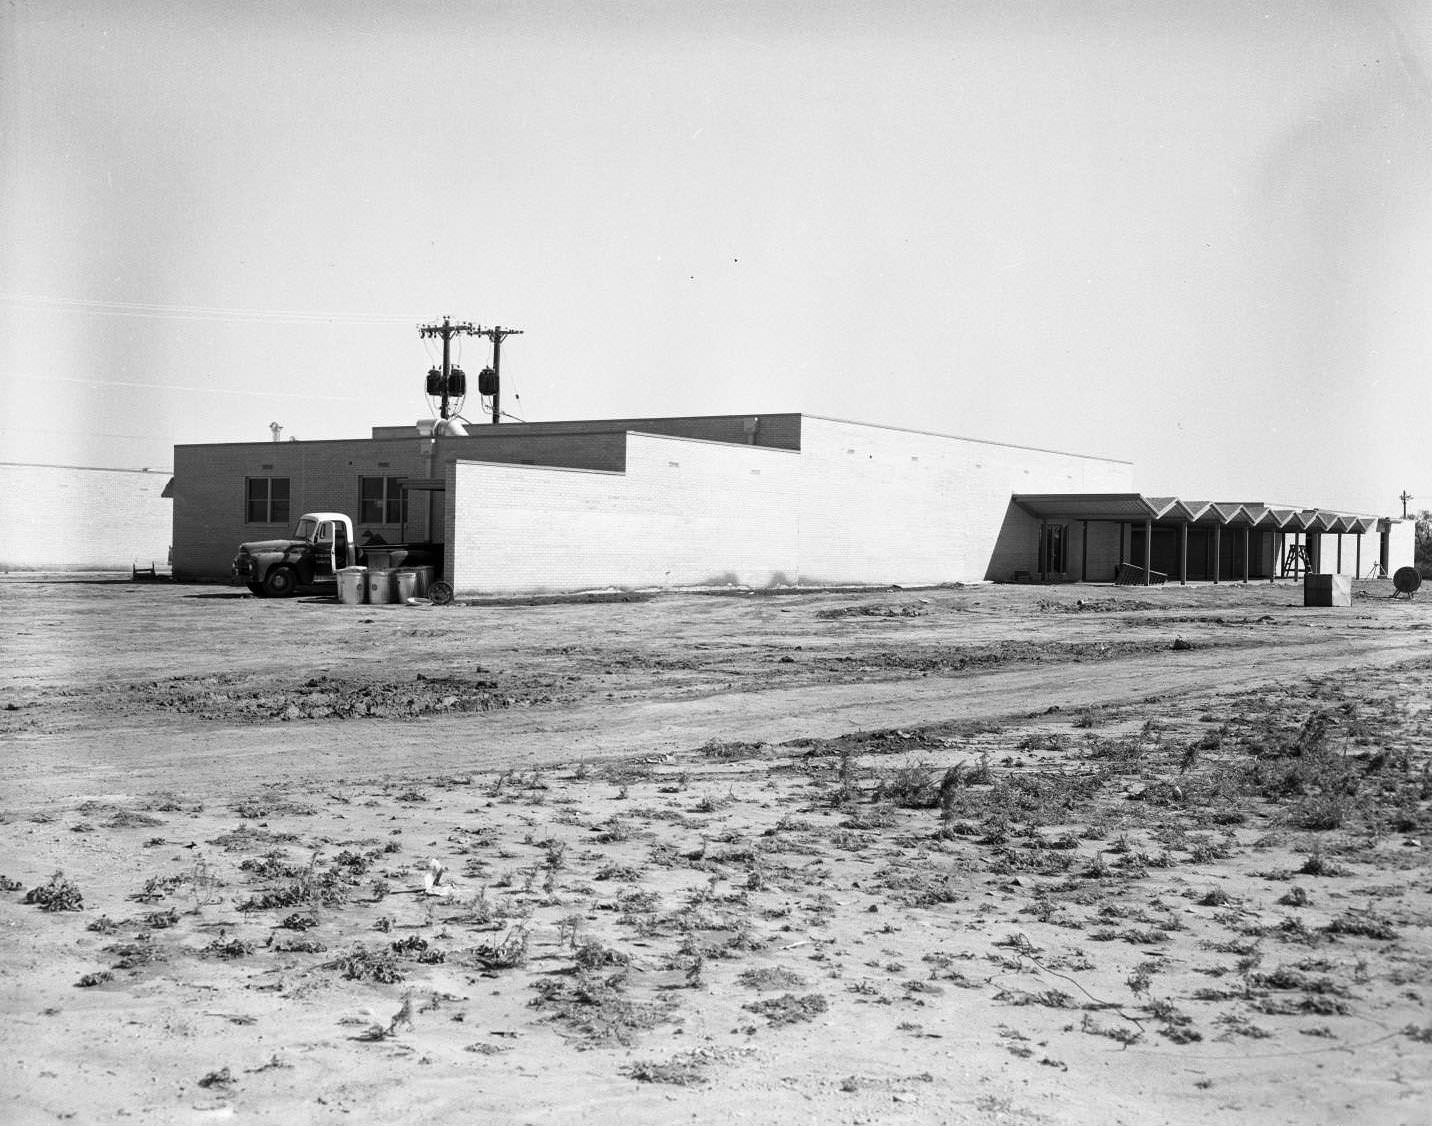 Elementary School Under Construction, 1958. The building has awnings, and there are vehicles parked beside it. It is in a bare field with power lines around it.